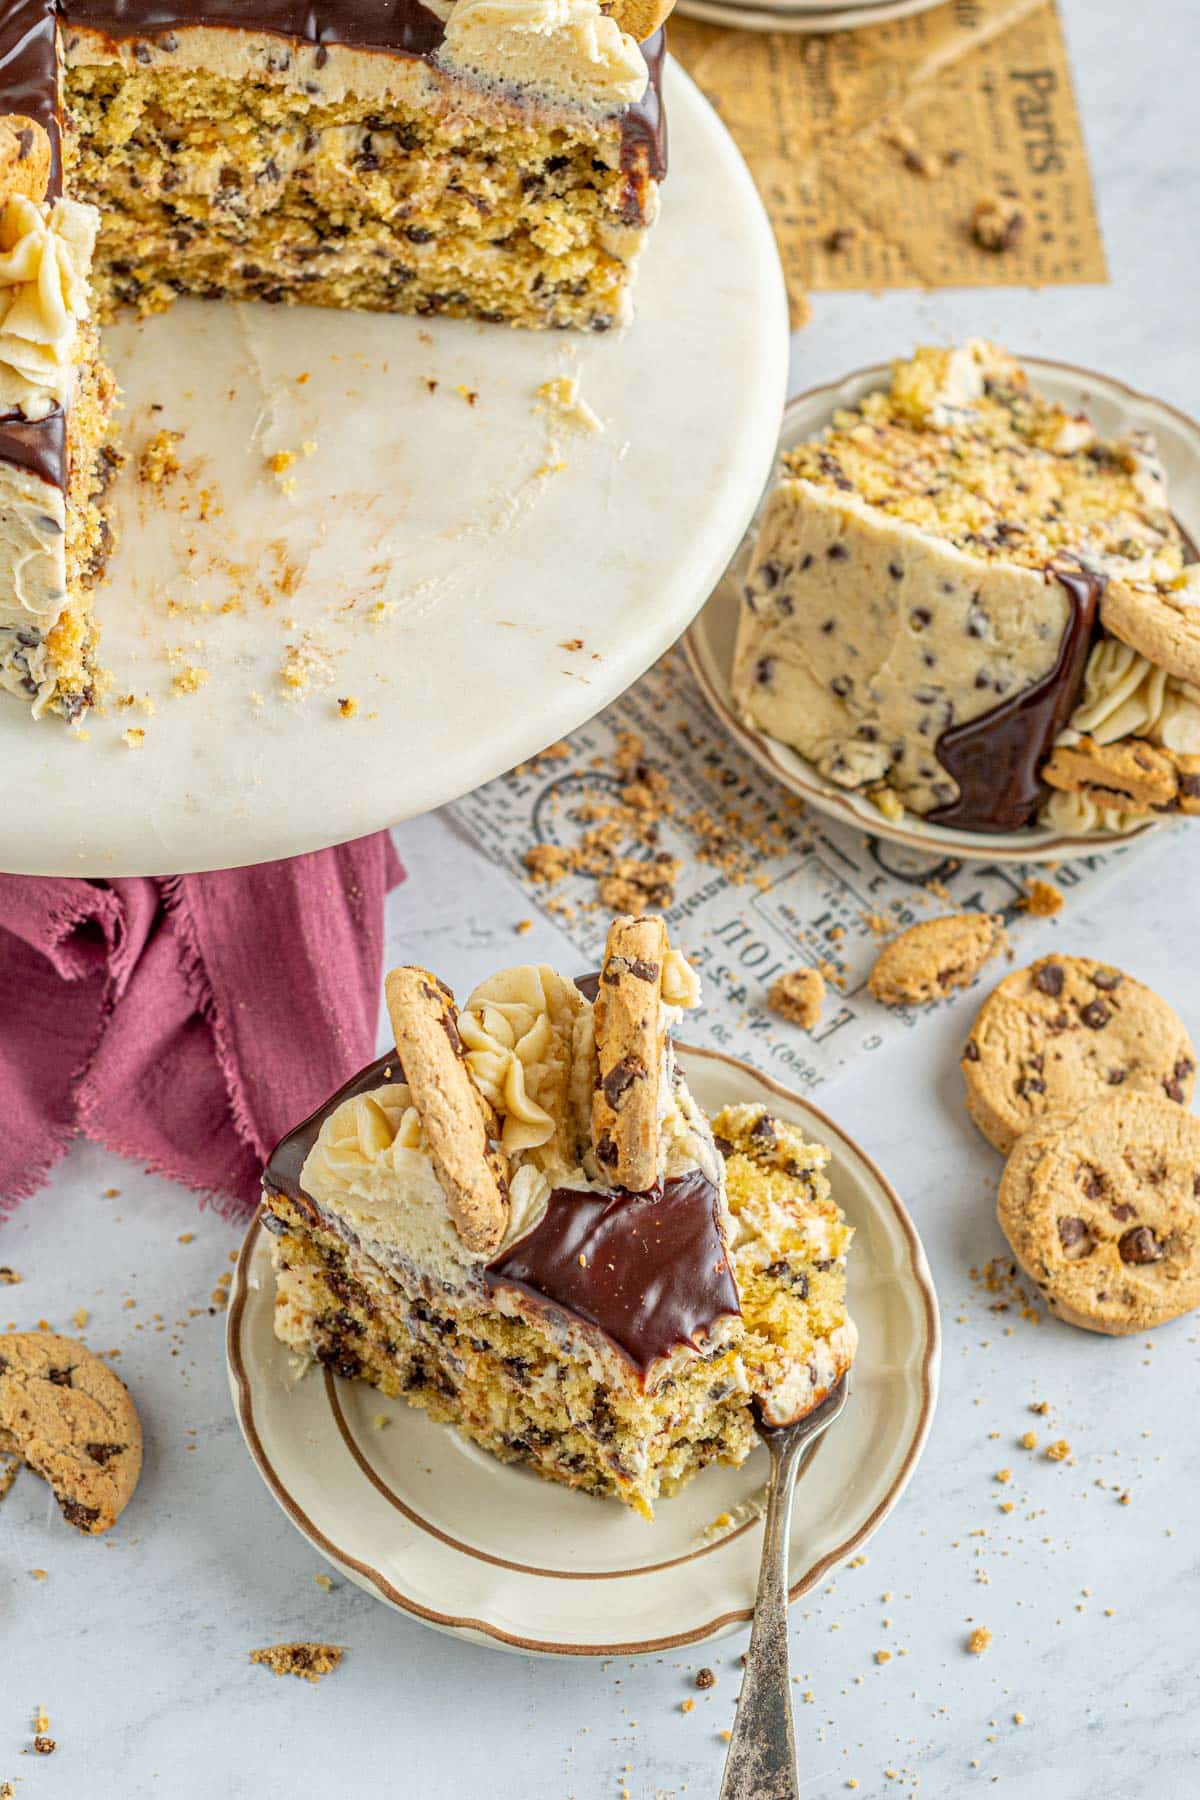 pieces of cake on plates surrounded by cookies